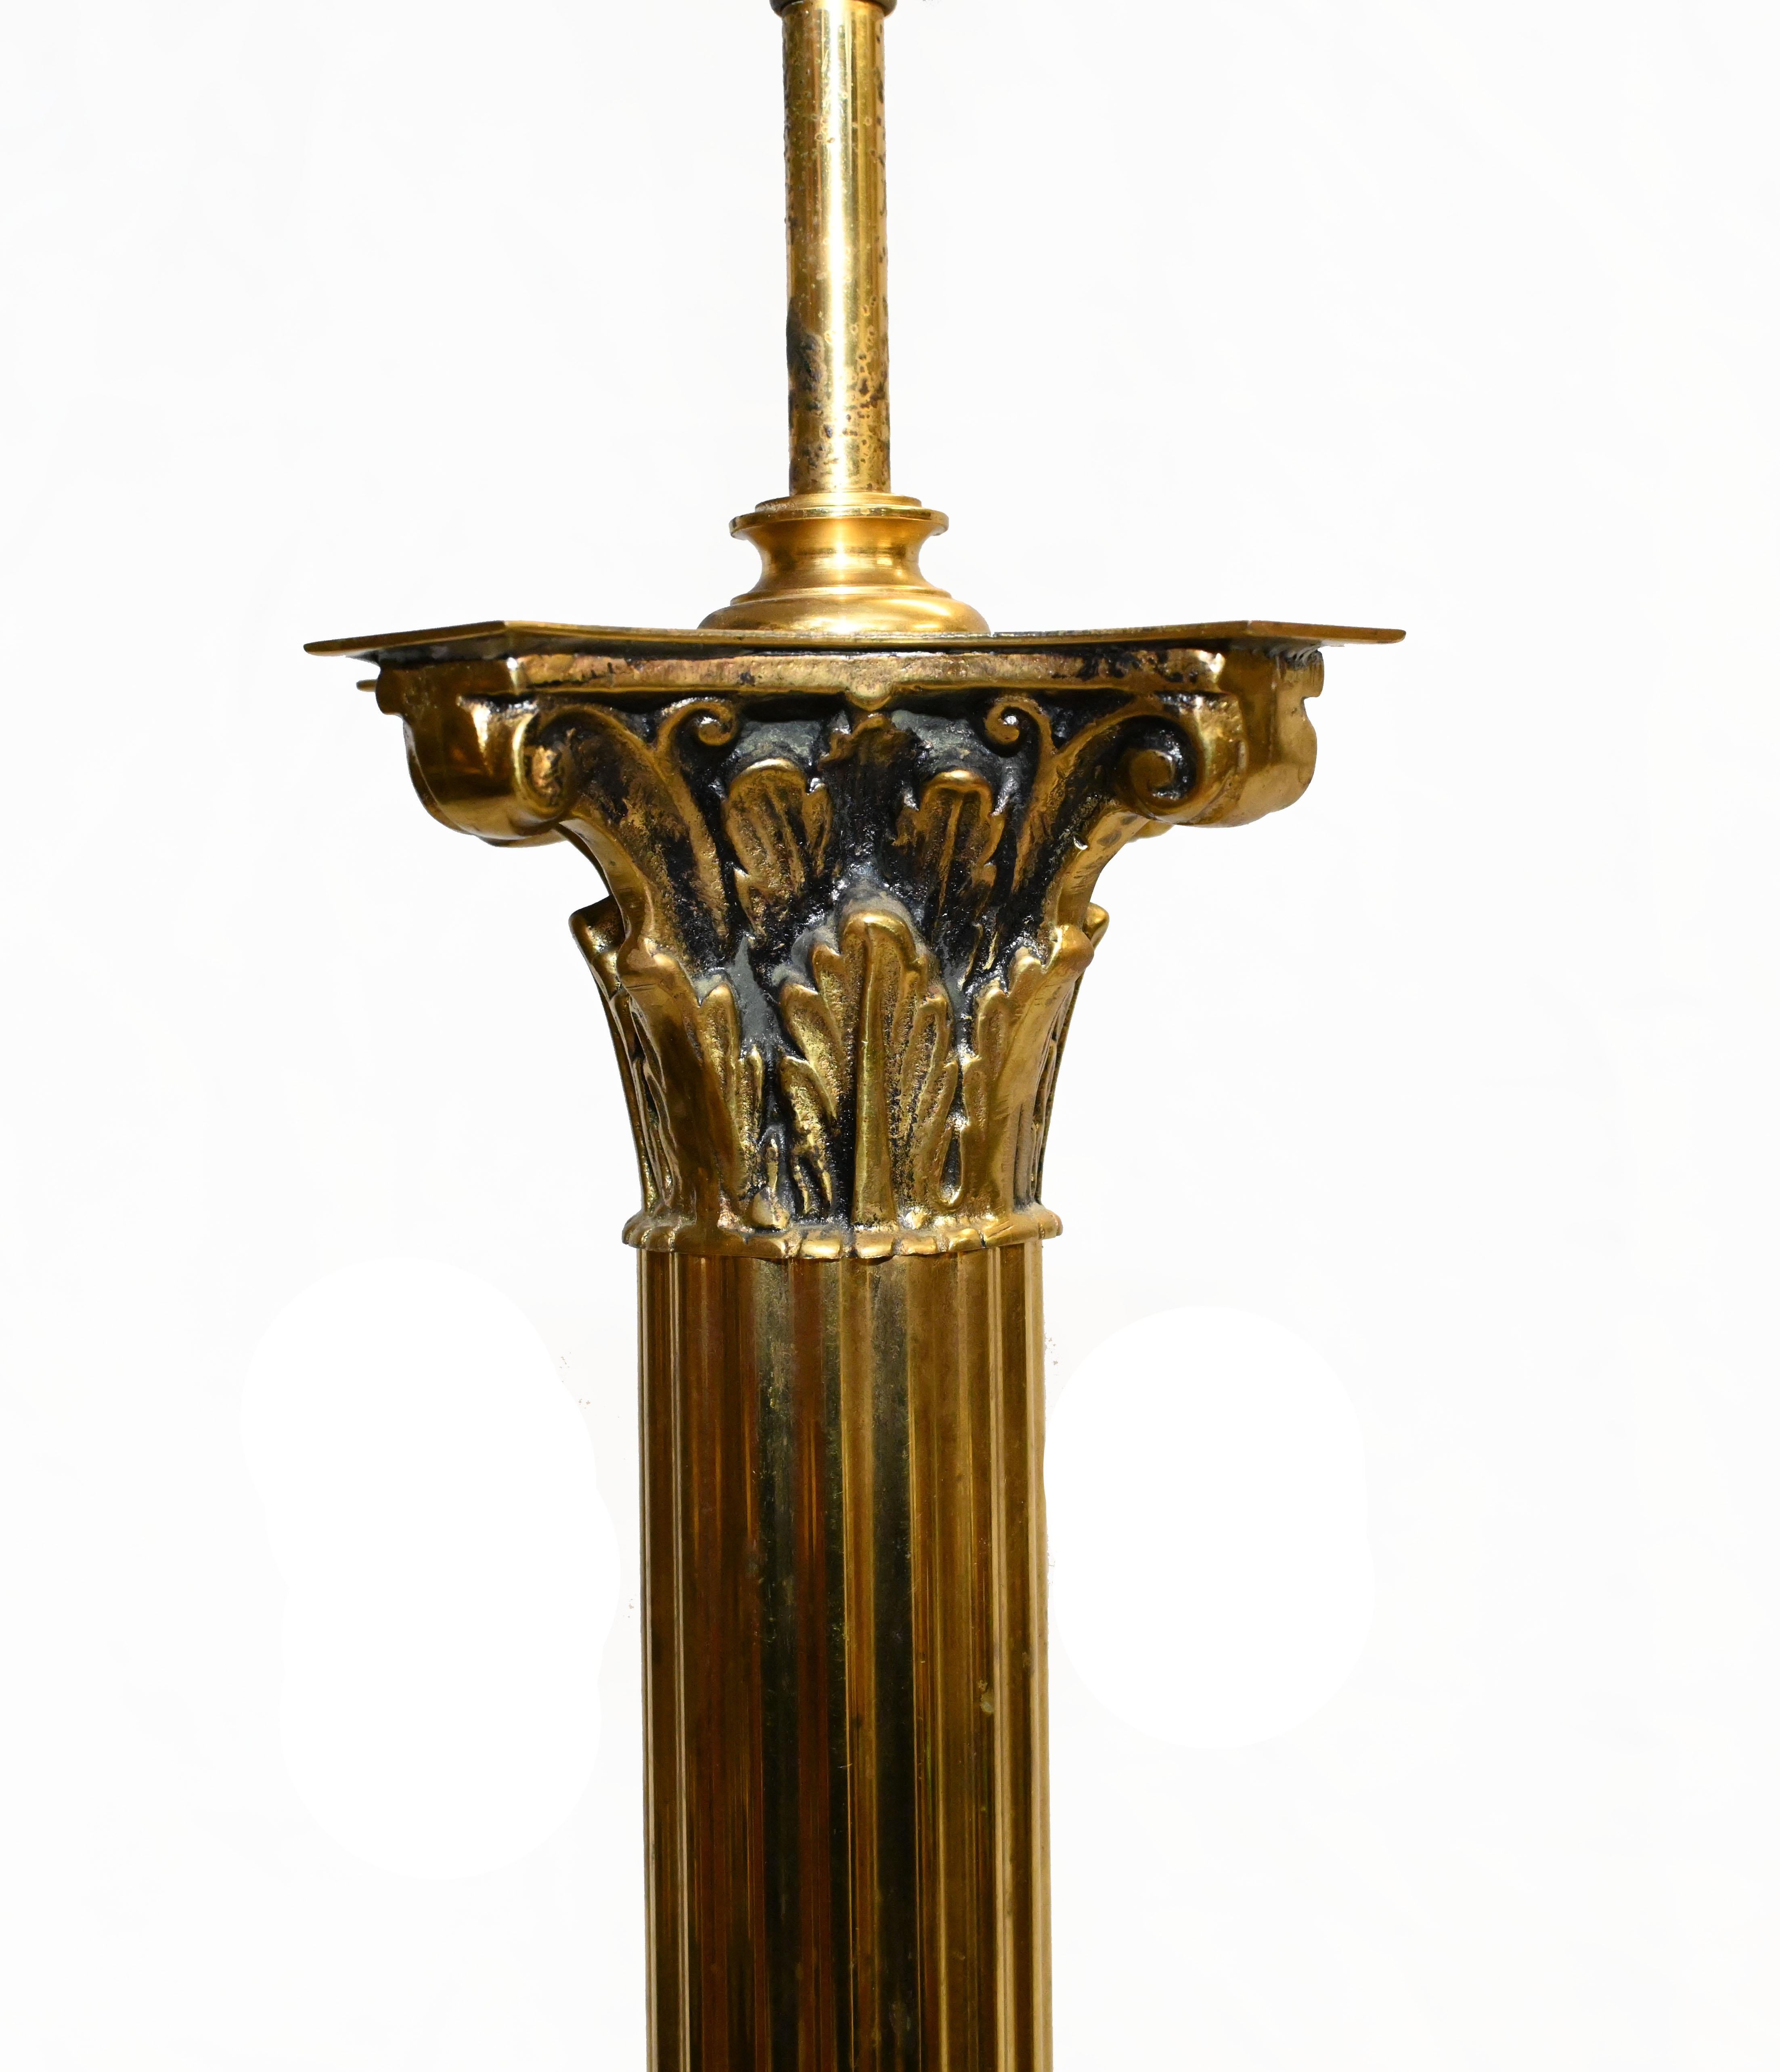 Gorgeous pair of table lamps in the form of Grand Tour ormolu columns
Modelled on the classical Corinthian column order
We date these to circa 1930
Would look great with the right matching lamp shades
Offered in great shape ready for home use